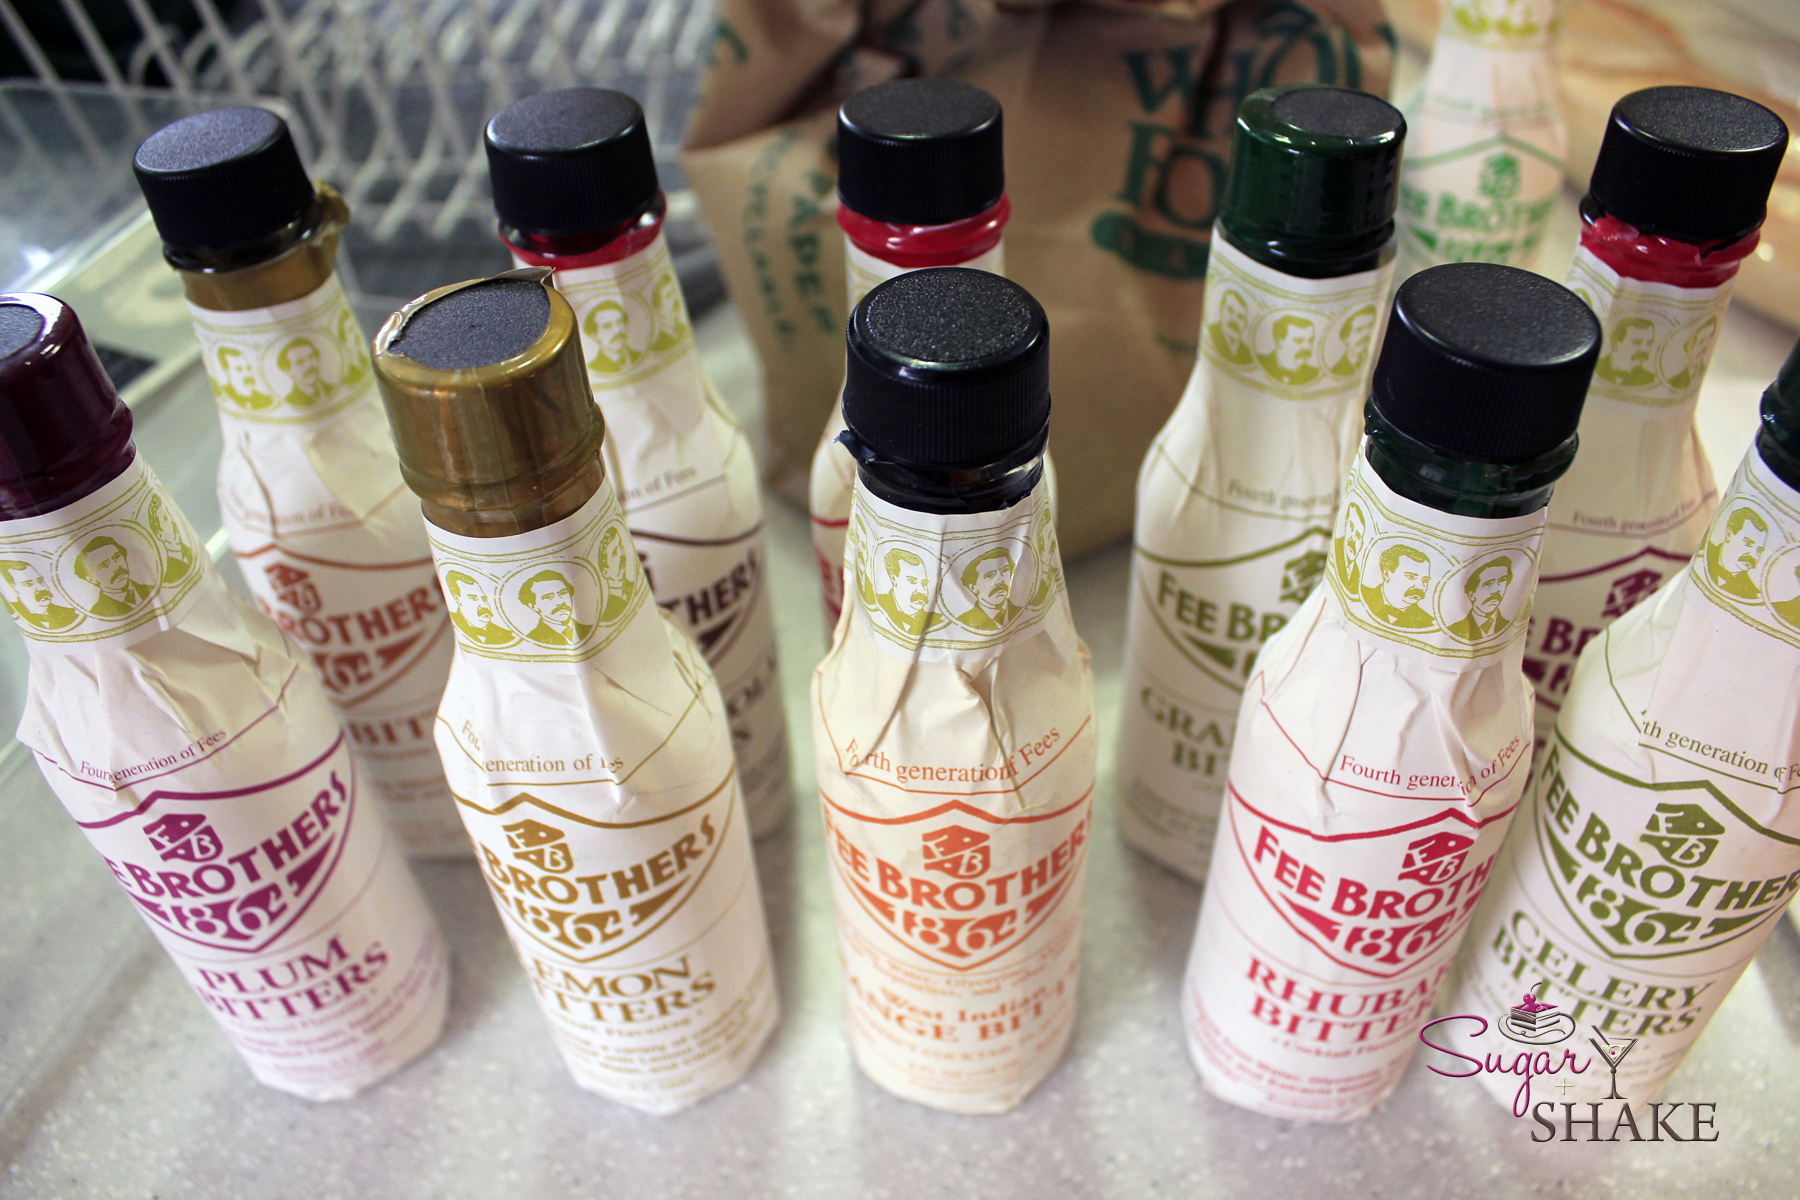 A portion of Shake’s bitters collection. © Sugar + Shake